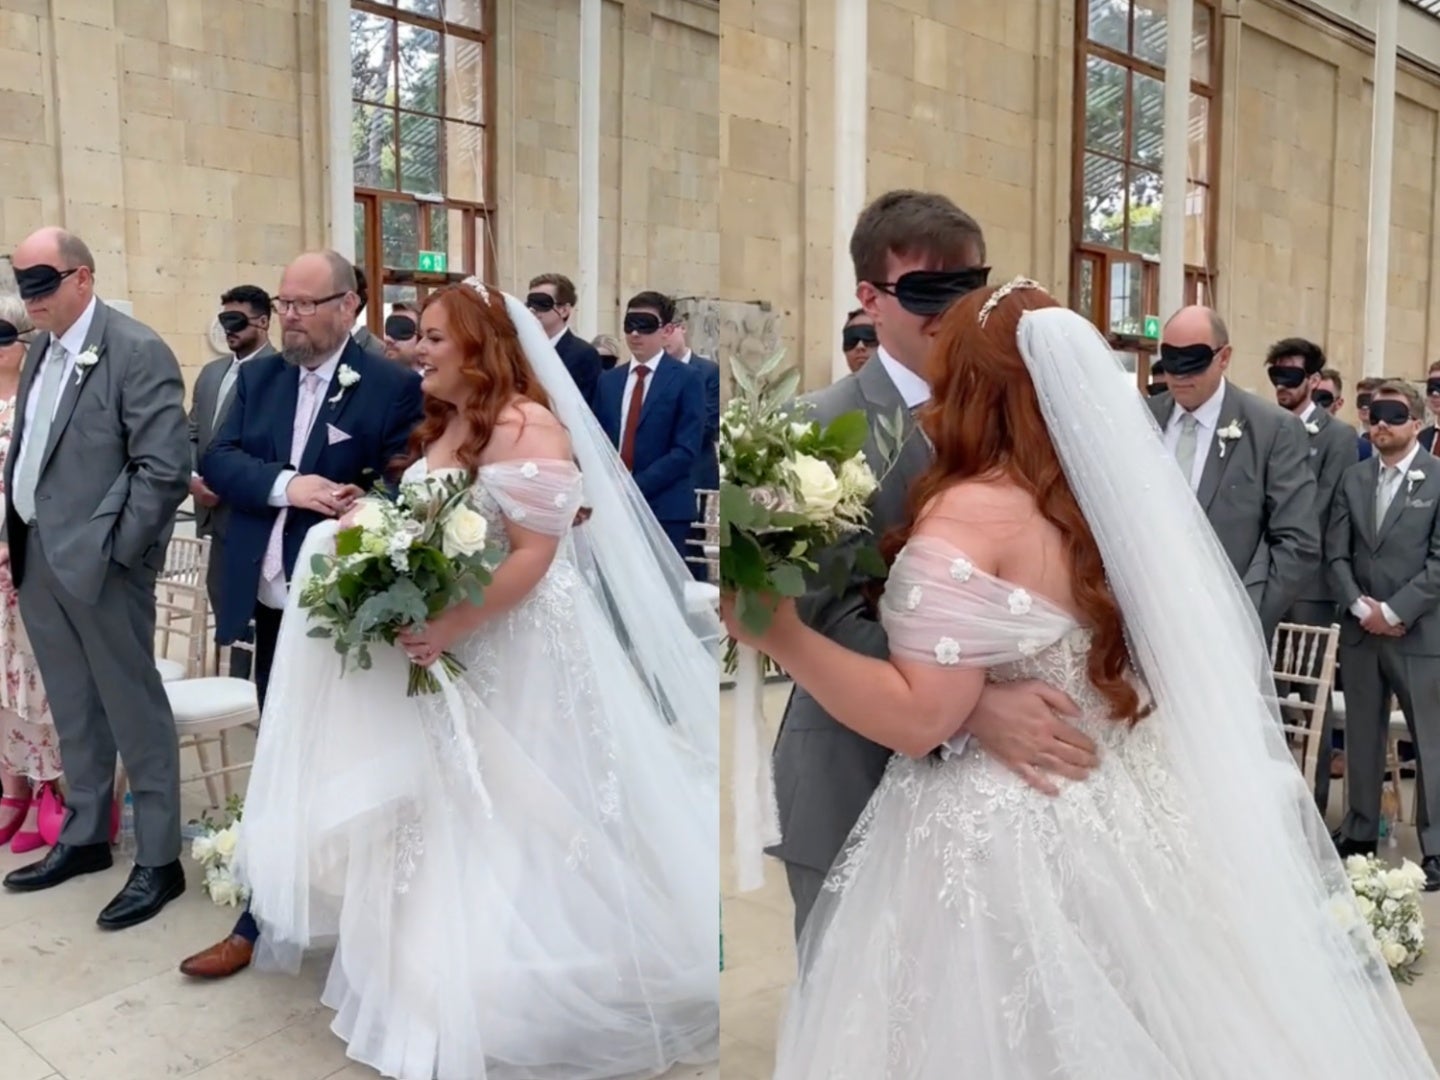 Bride who lost sight as a teenager has wedding guests live a moment in her shoes with blindfolds The Independent pic